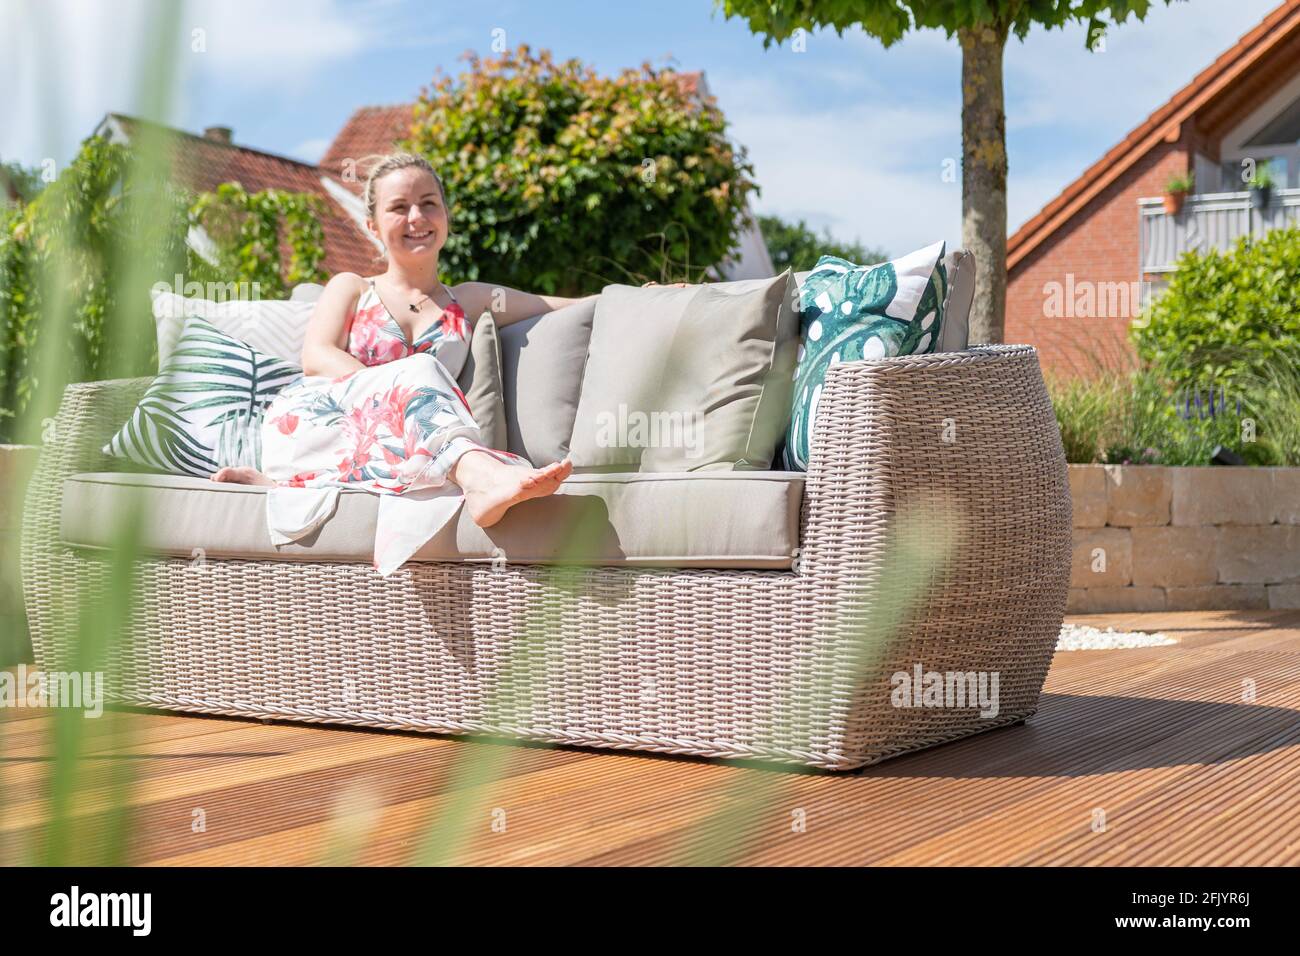 Attractive blonde woman and dog relaxing on a wooden terrace with green garden and modern outdoor furniture on a sunny day Stock Photo